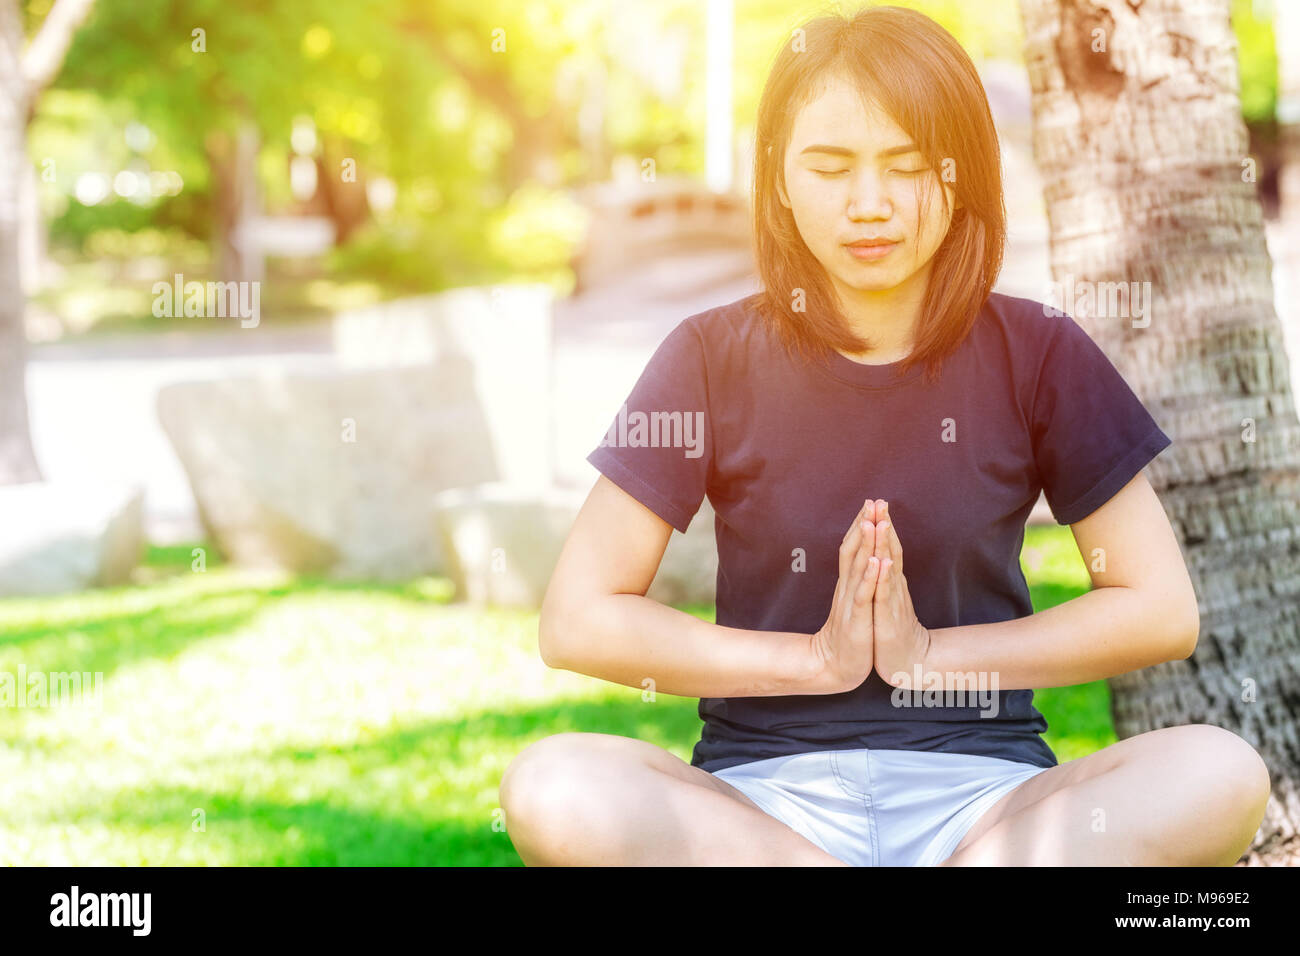 Teen Outdoor Yoga relax and concentration with nature peace for mental health Stock Photo